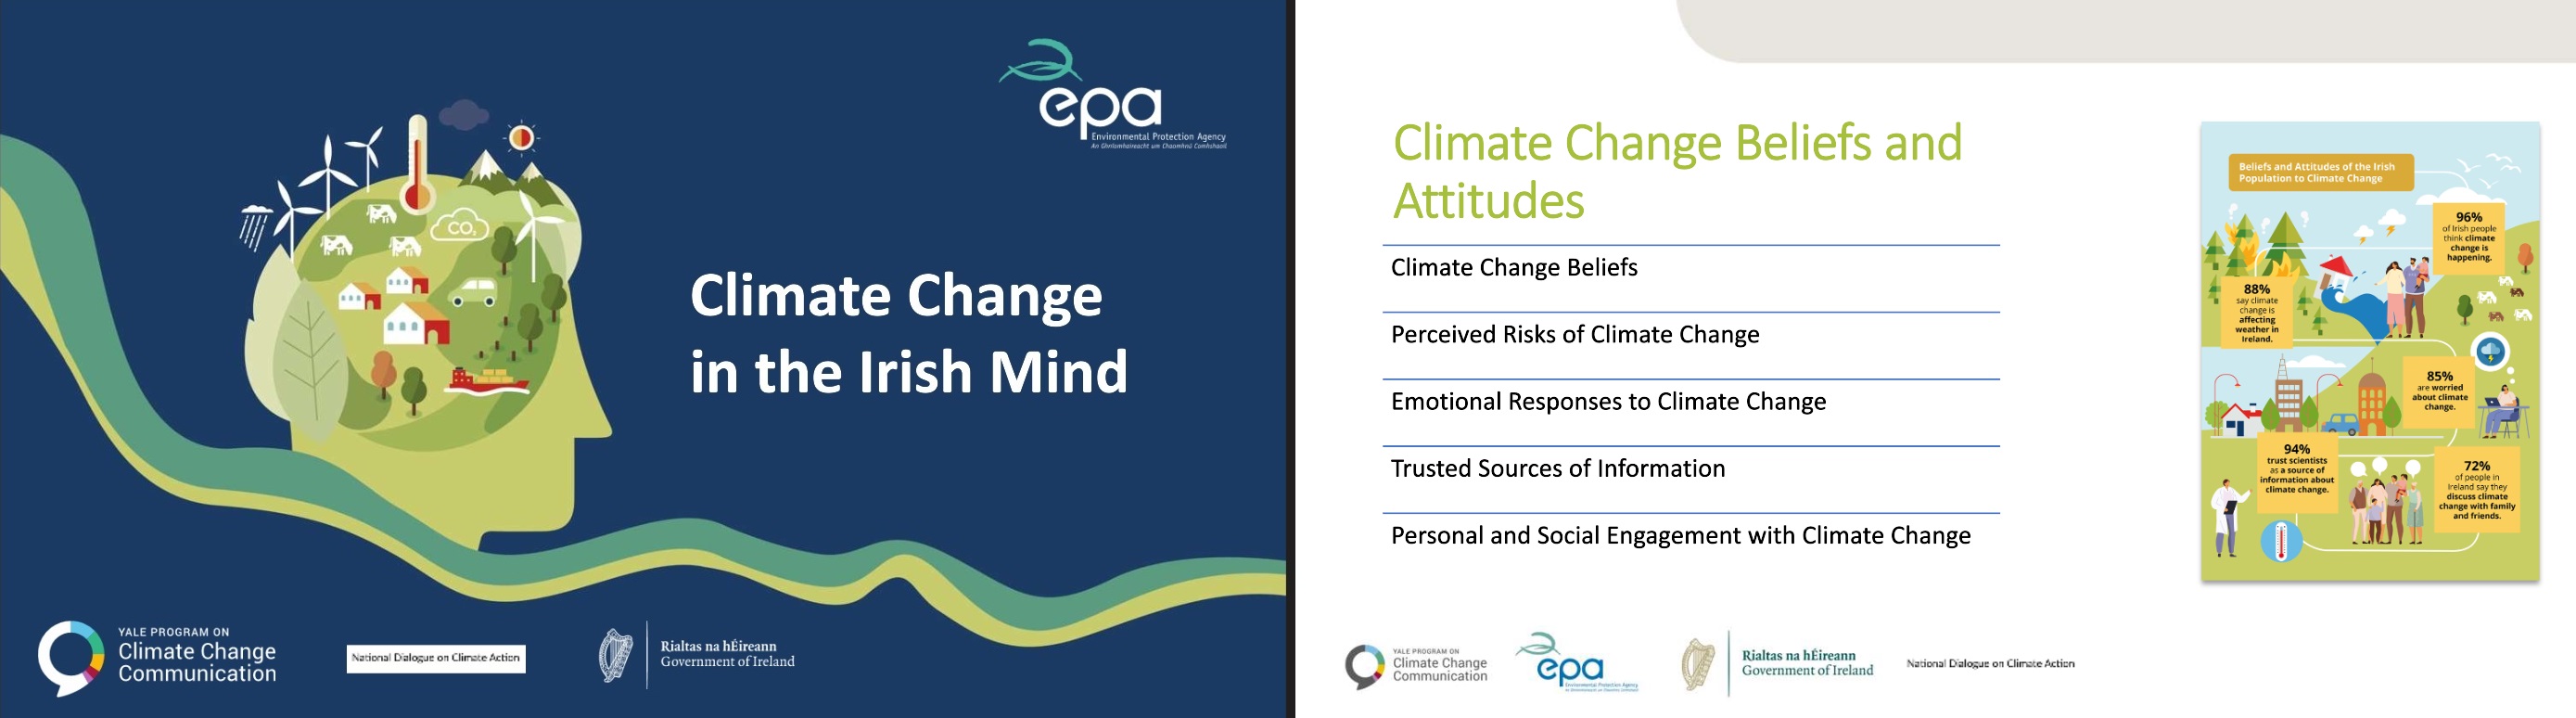 Slides from the EPA presentation Climate Change in the Irish Mind